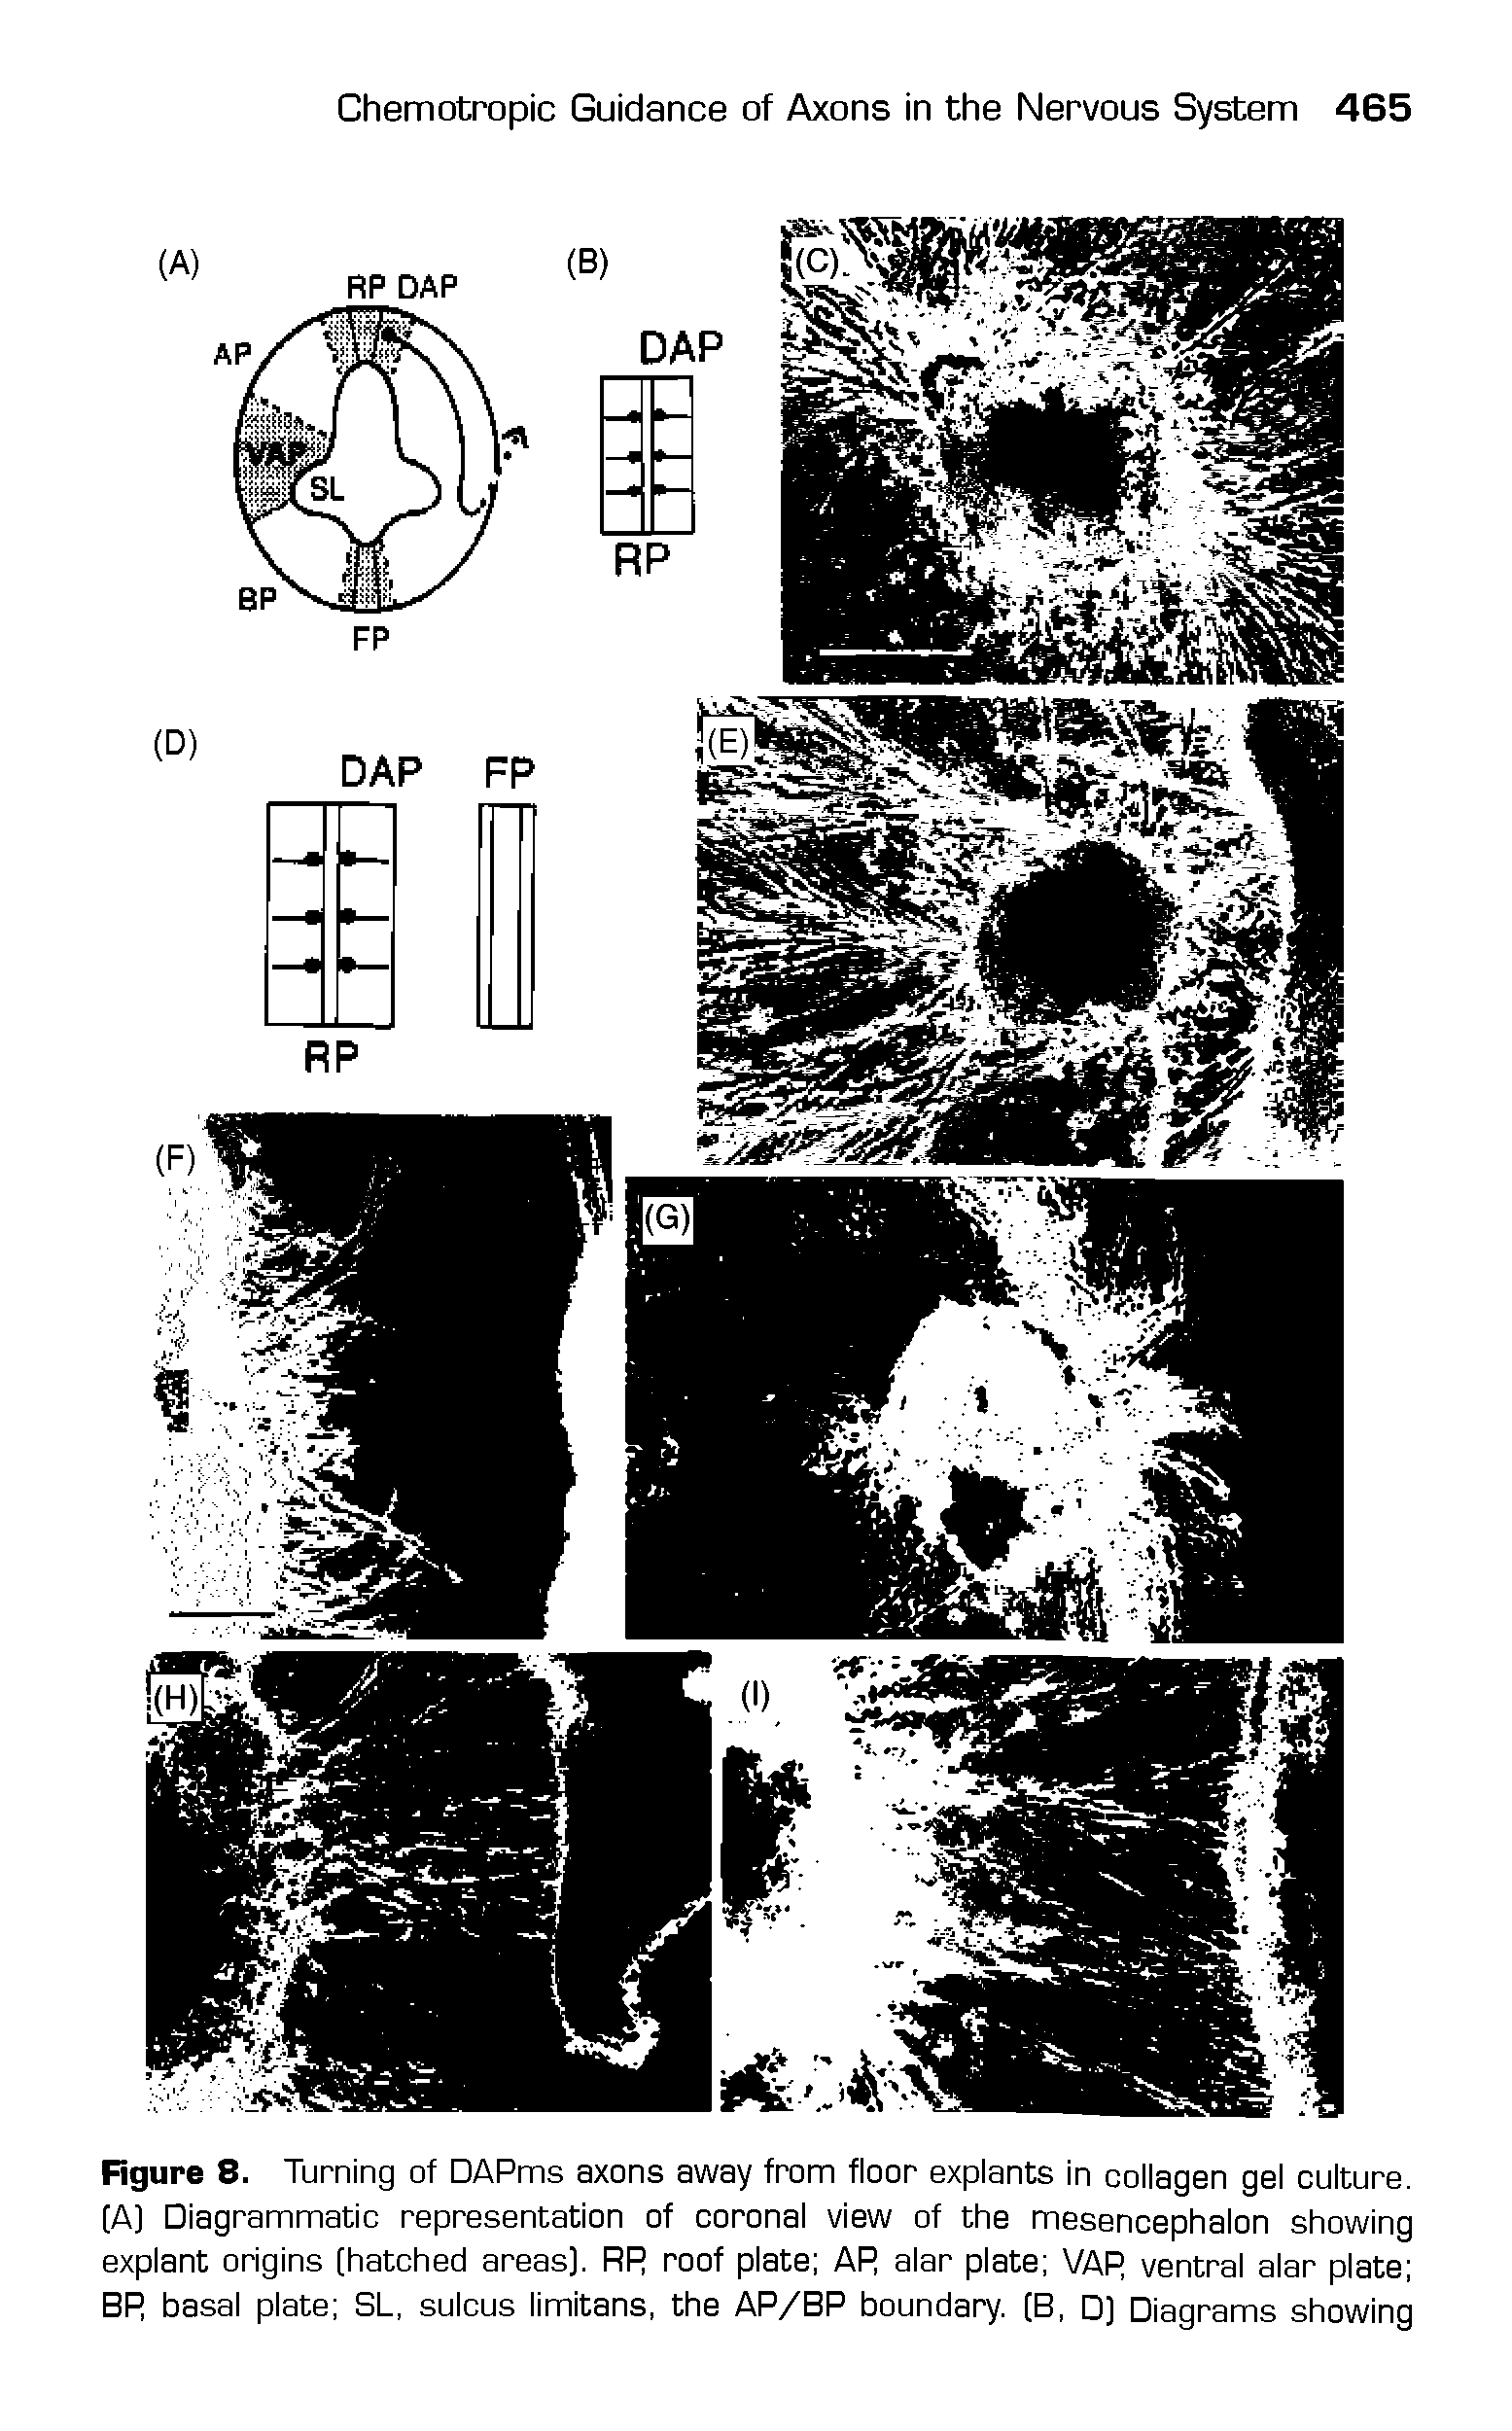 Figure 8. Turning of DAPms axons away from floor explants in collagen gel culture. (A) Diagrammatic representation of coronal view of the mesencephalon showing explant origins (hatched areas). RR roof plate AR alar plate VAR ventral alar plate BR basal plate SL, sulcus limitans, the AR/BR boundary. (B, D) Diagrams showing...